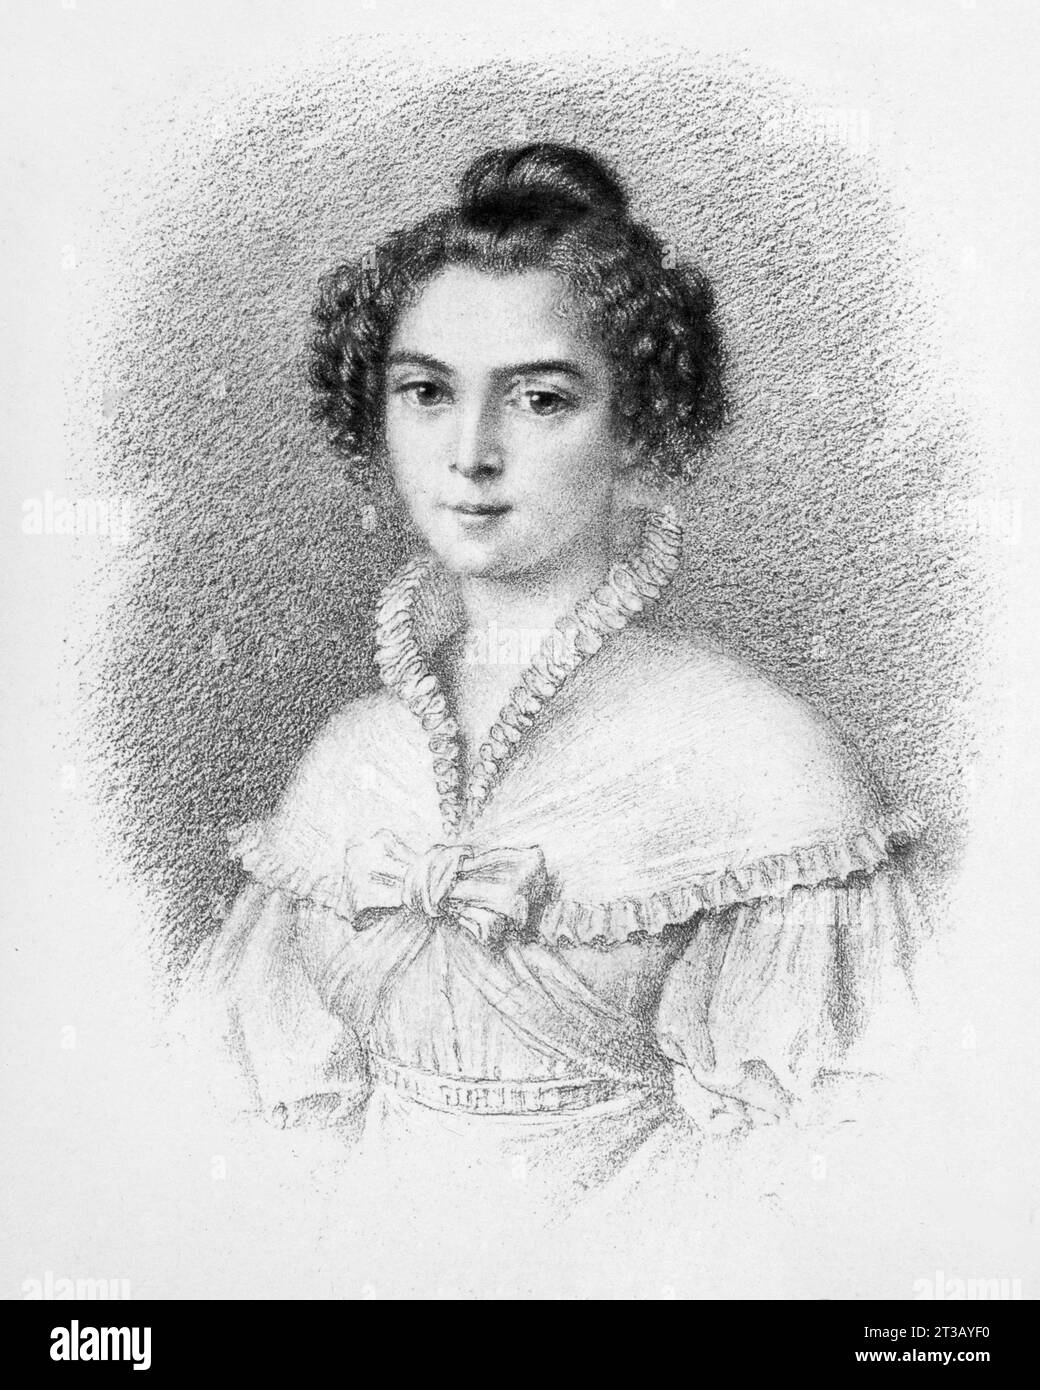 Engraving , Portrait of Adele Hugo ( 1830 - 1915 ) composer, fifth child and second daughter of Victor Hugo and Adèle Foucher (also called Adèle Hugo) the only one who survived her illustrious father Victor Hugo Stock Photo